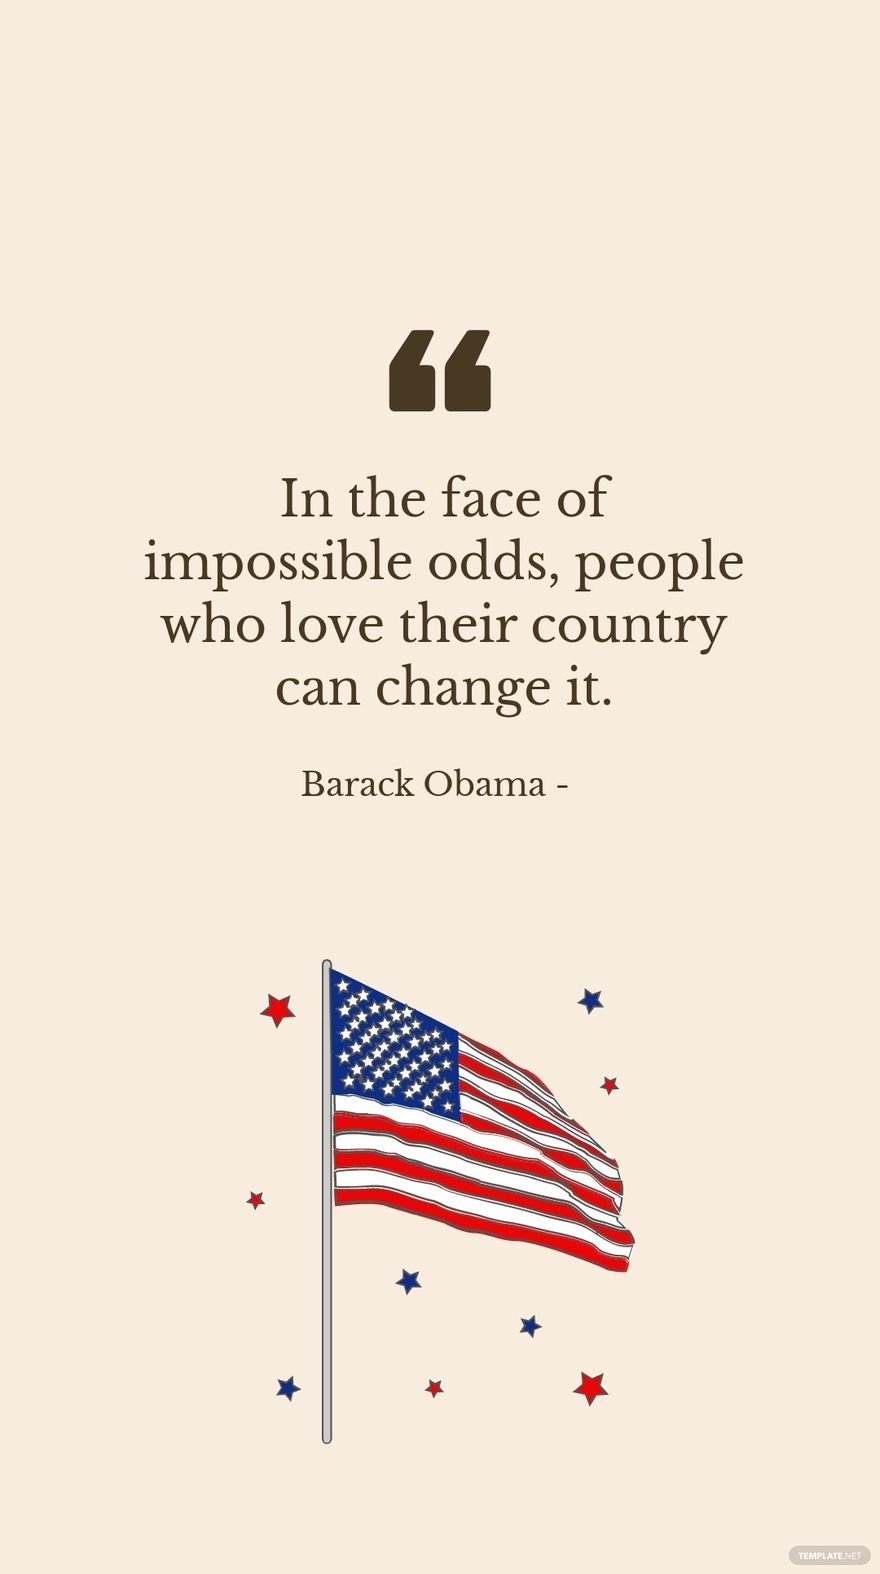 Barack Obama - In the face of impossible odds, people who love their country can change it. in JPG